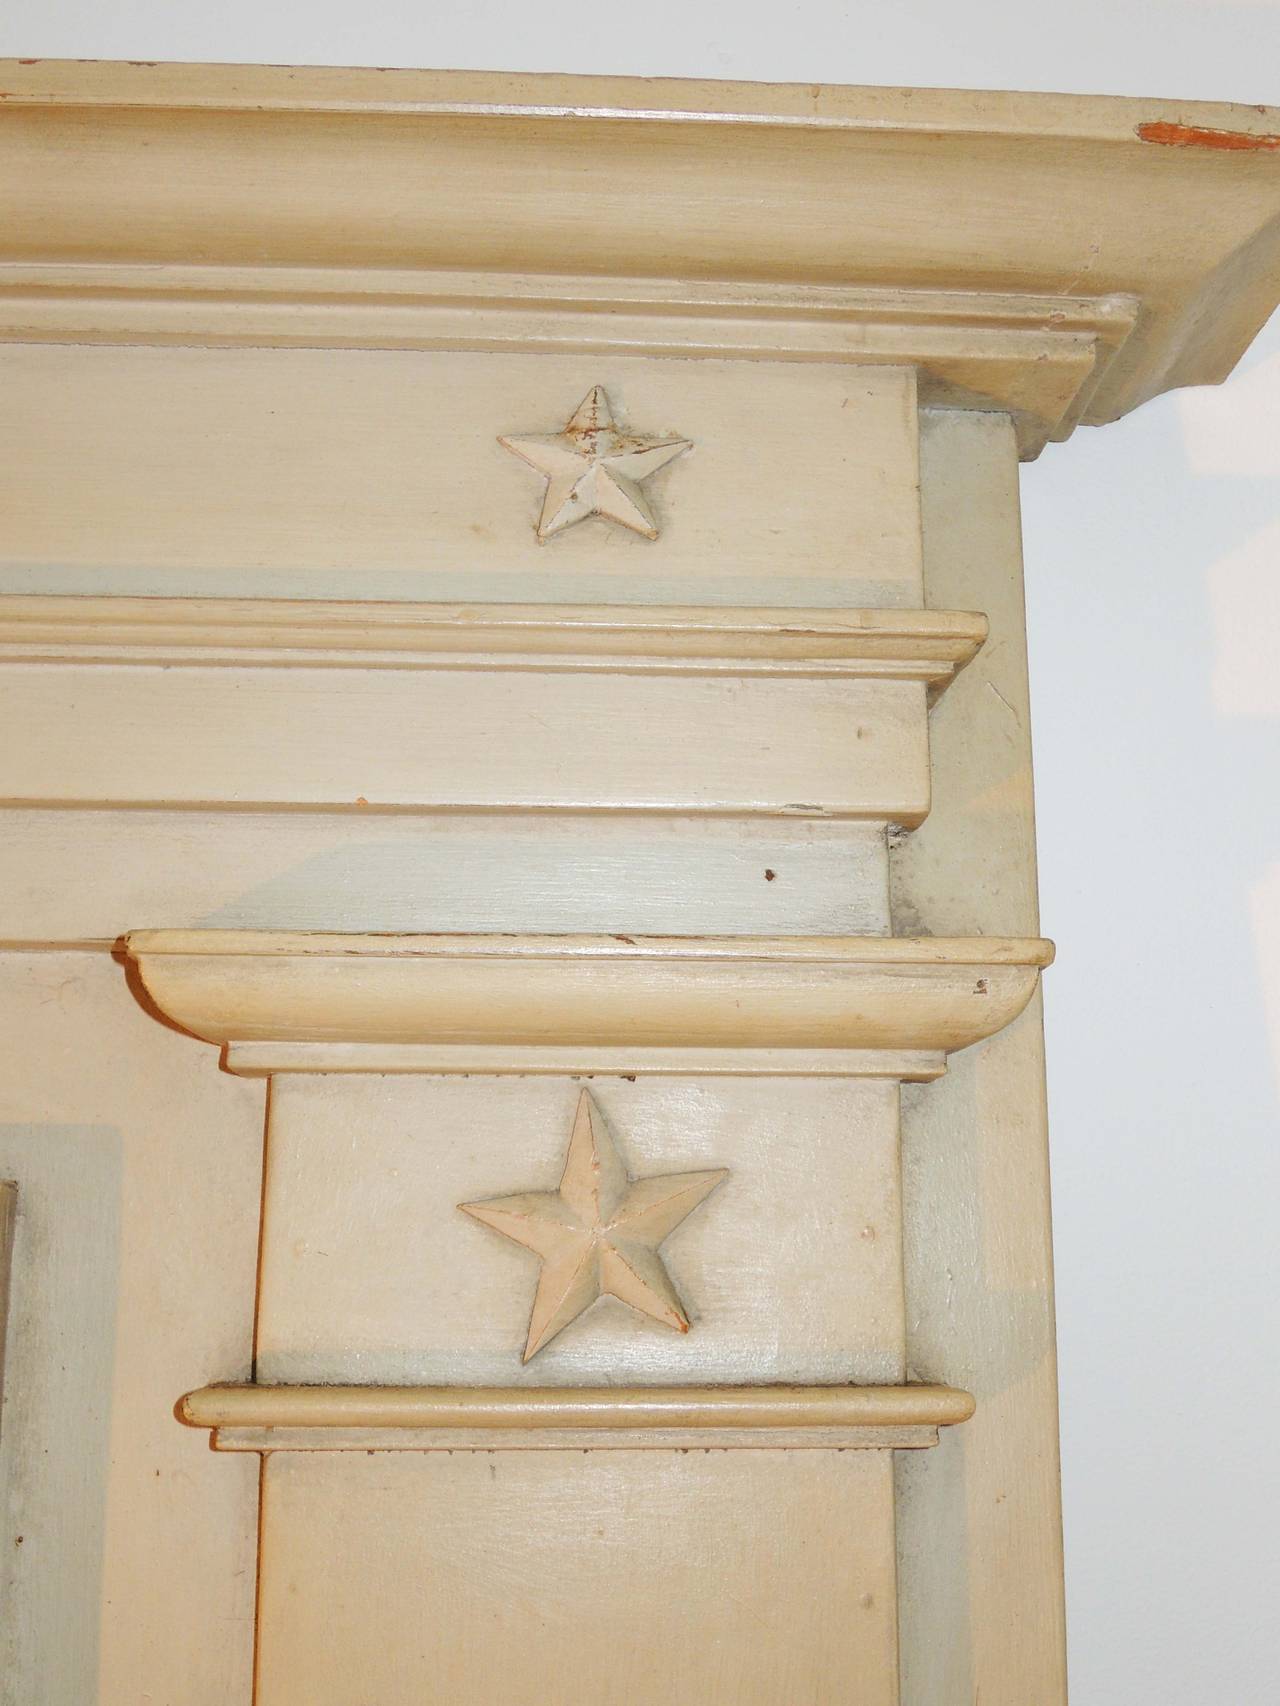 Original paint, decorative brass accents of angels and birds on the sides, carved wooden stars adorn the top. Bottom glass is original. Top glass replaced at some point with old mirror. All moldings, trim, etc. solidly in place. Good thickness and